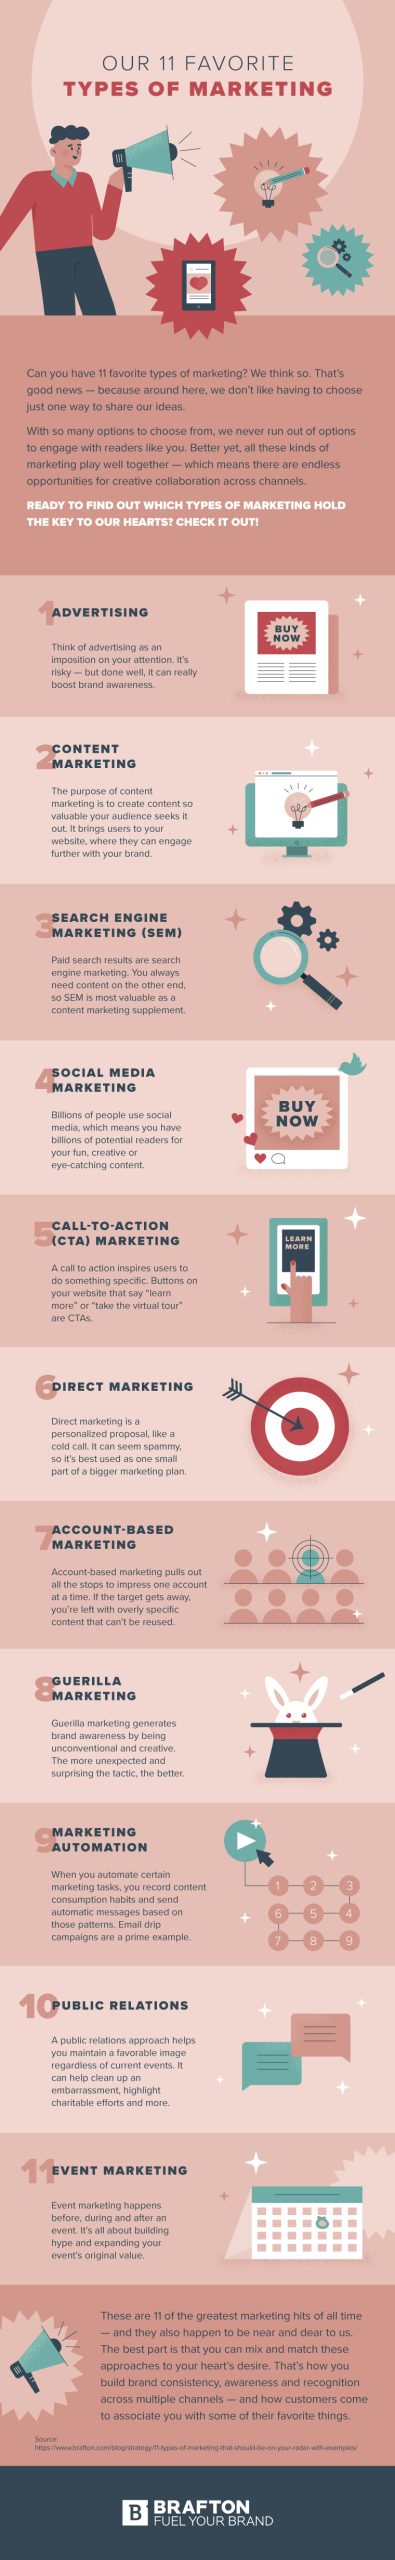 11 types of marketing infographic